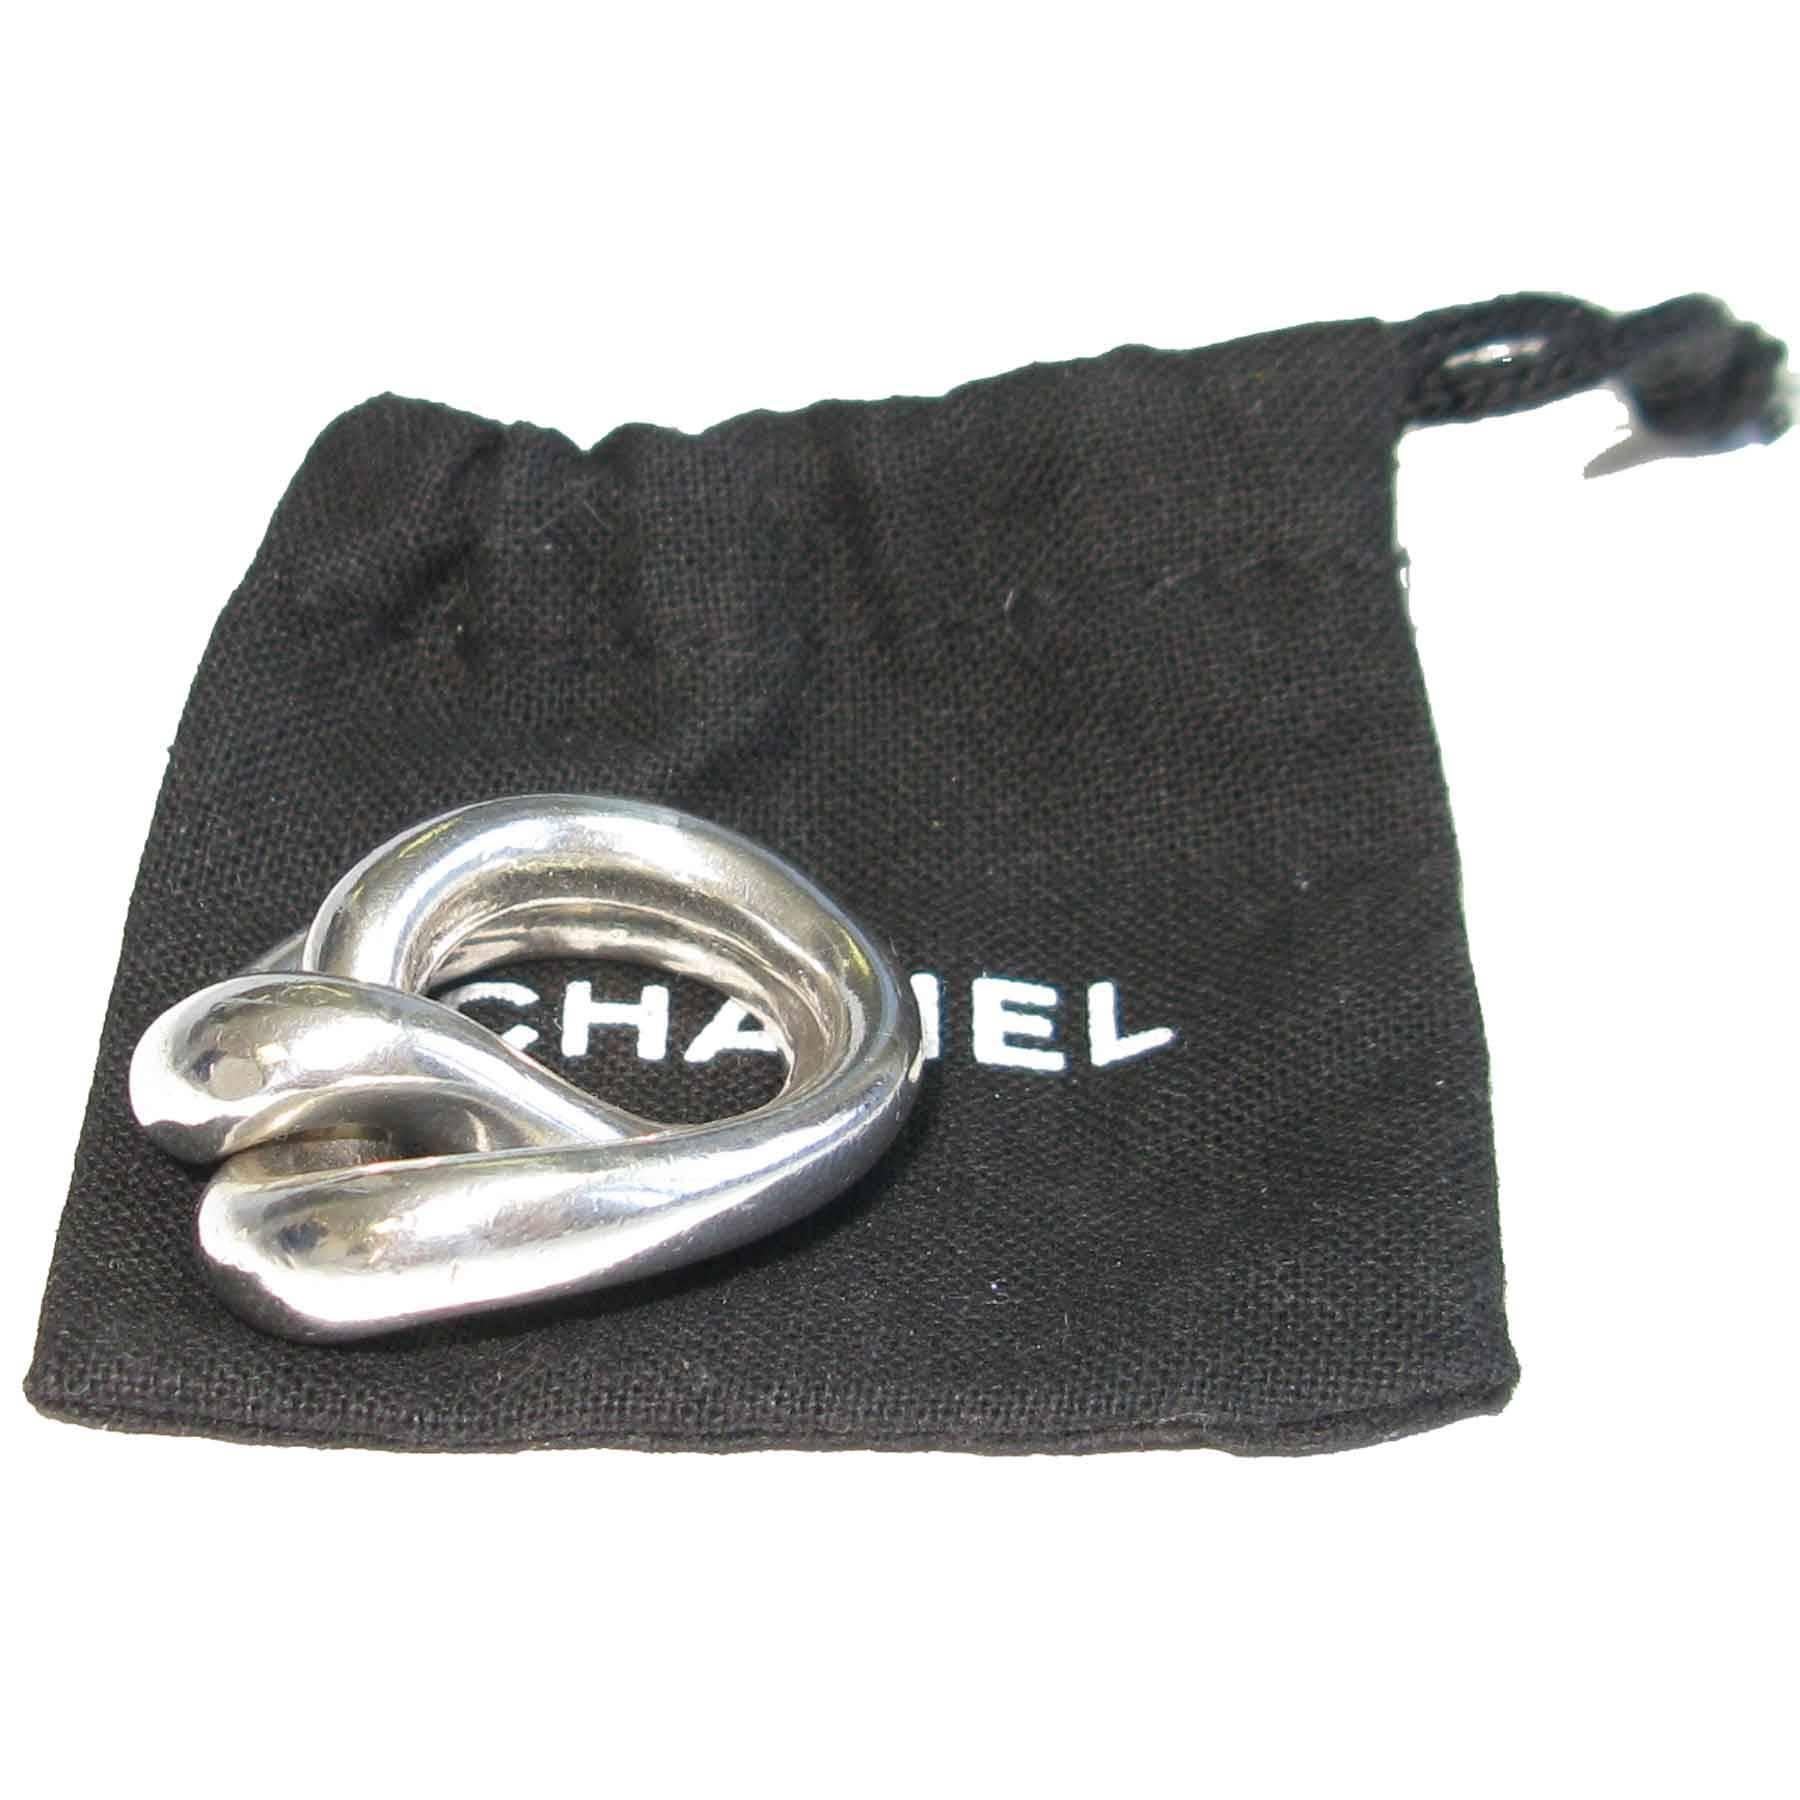 CHANEL Double Ring In Sterling Silver Ag925 Size 50 EU - 5.5 US 3